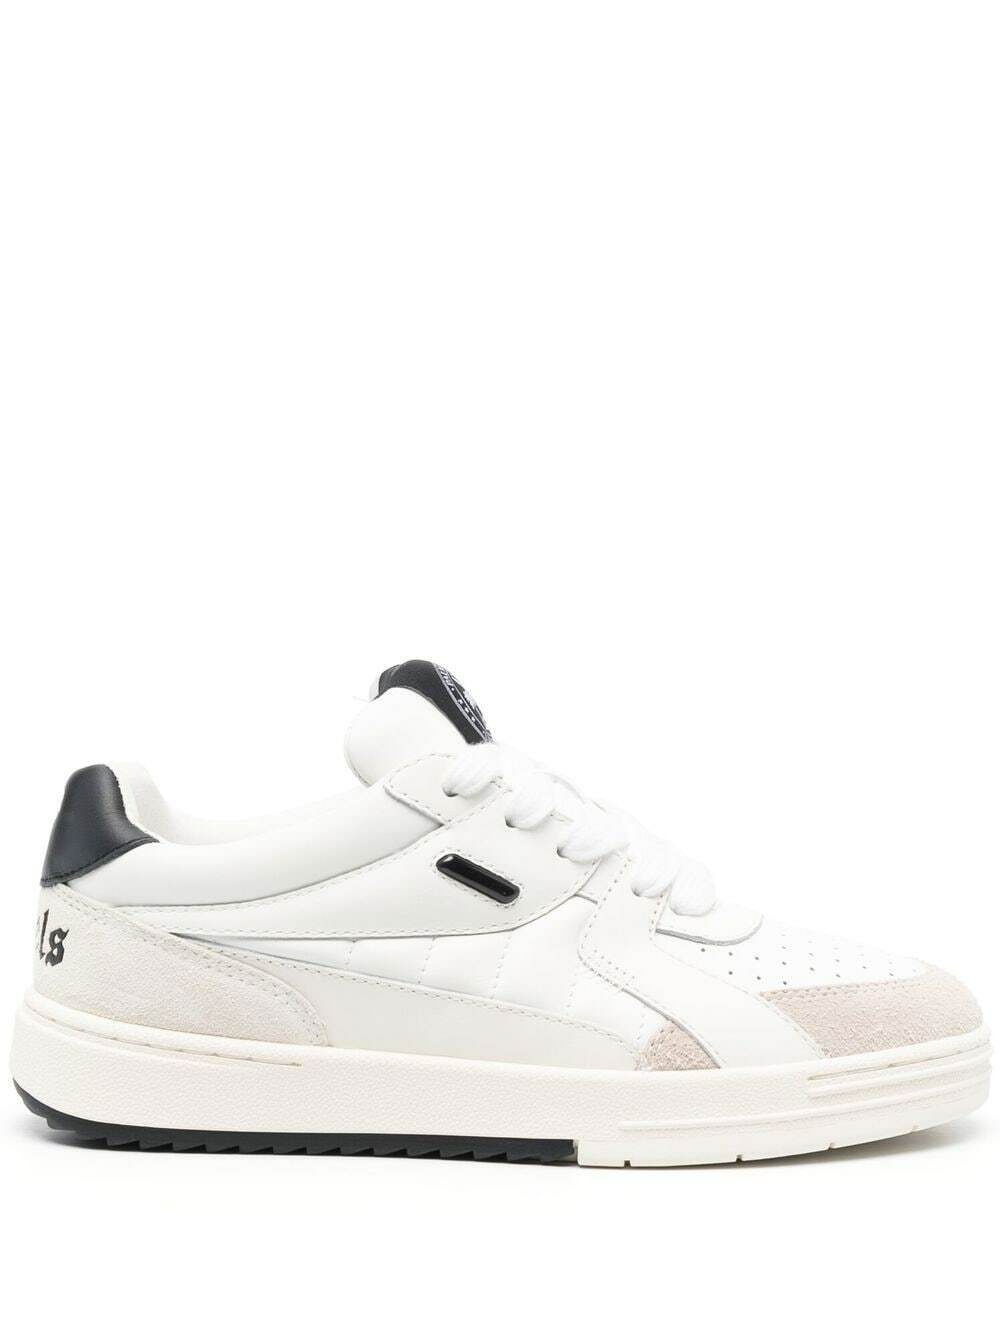 PALM ANGELS - Palm University Leather Sneakers Palm Angels